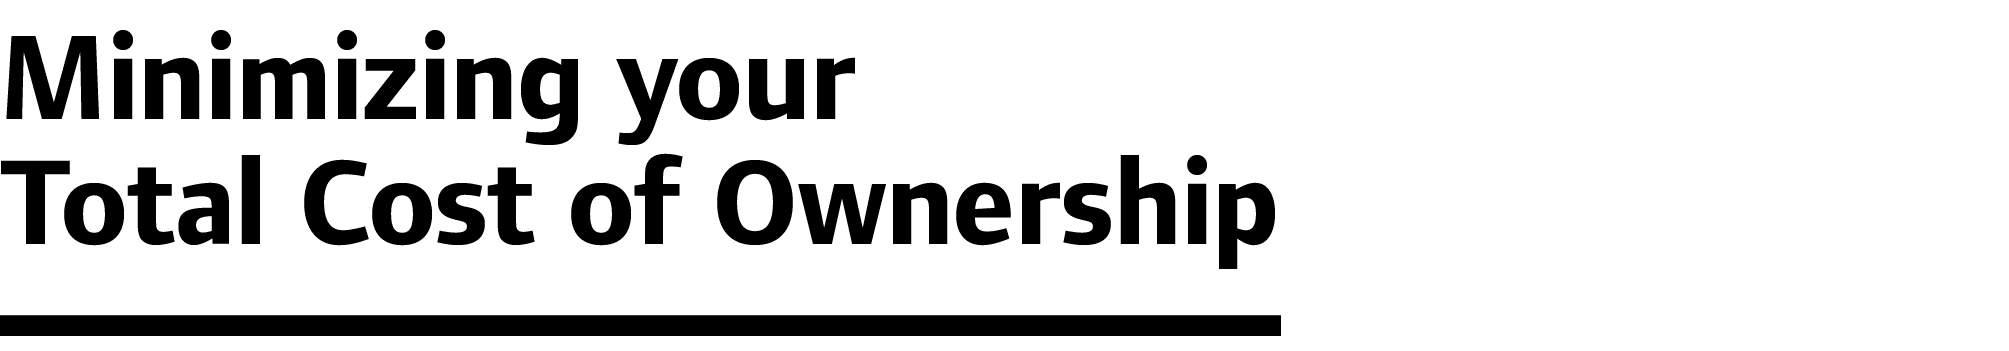 Minimizing your Total Cost of Ownership 